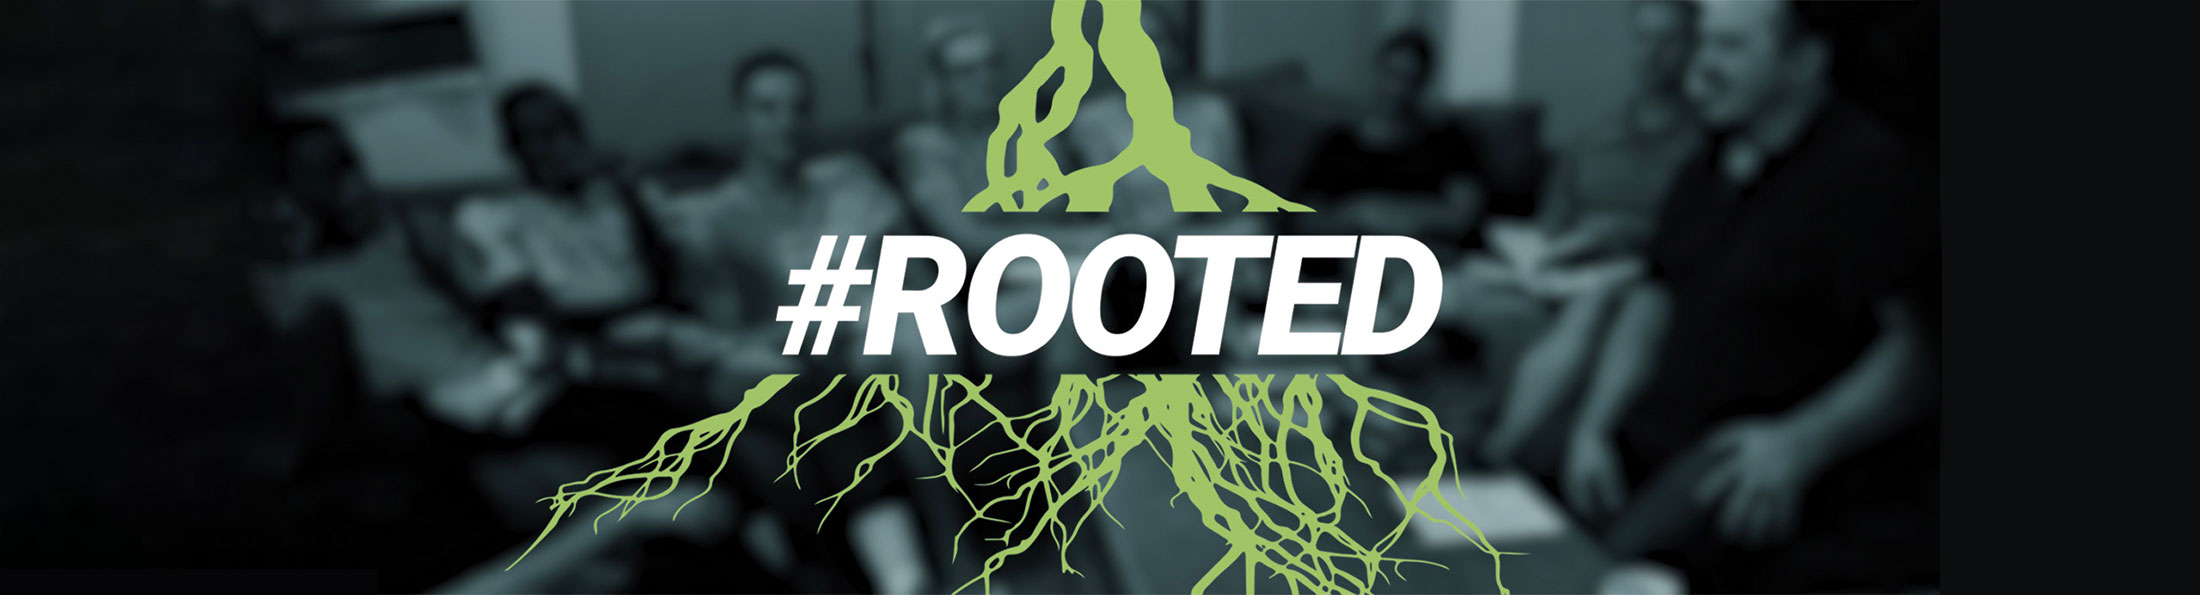 Rooted_Slider